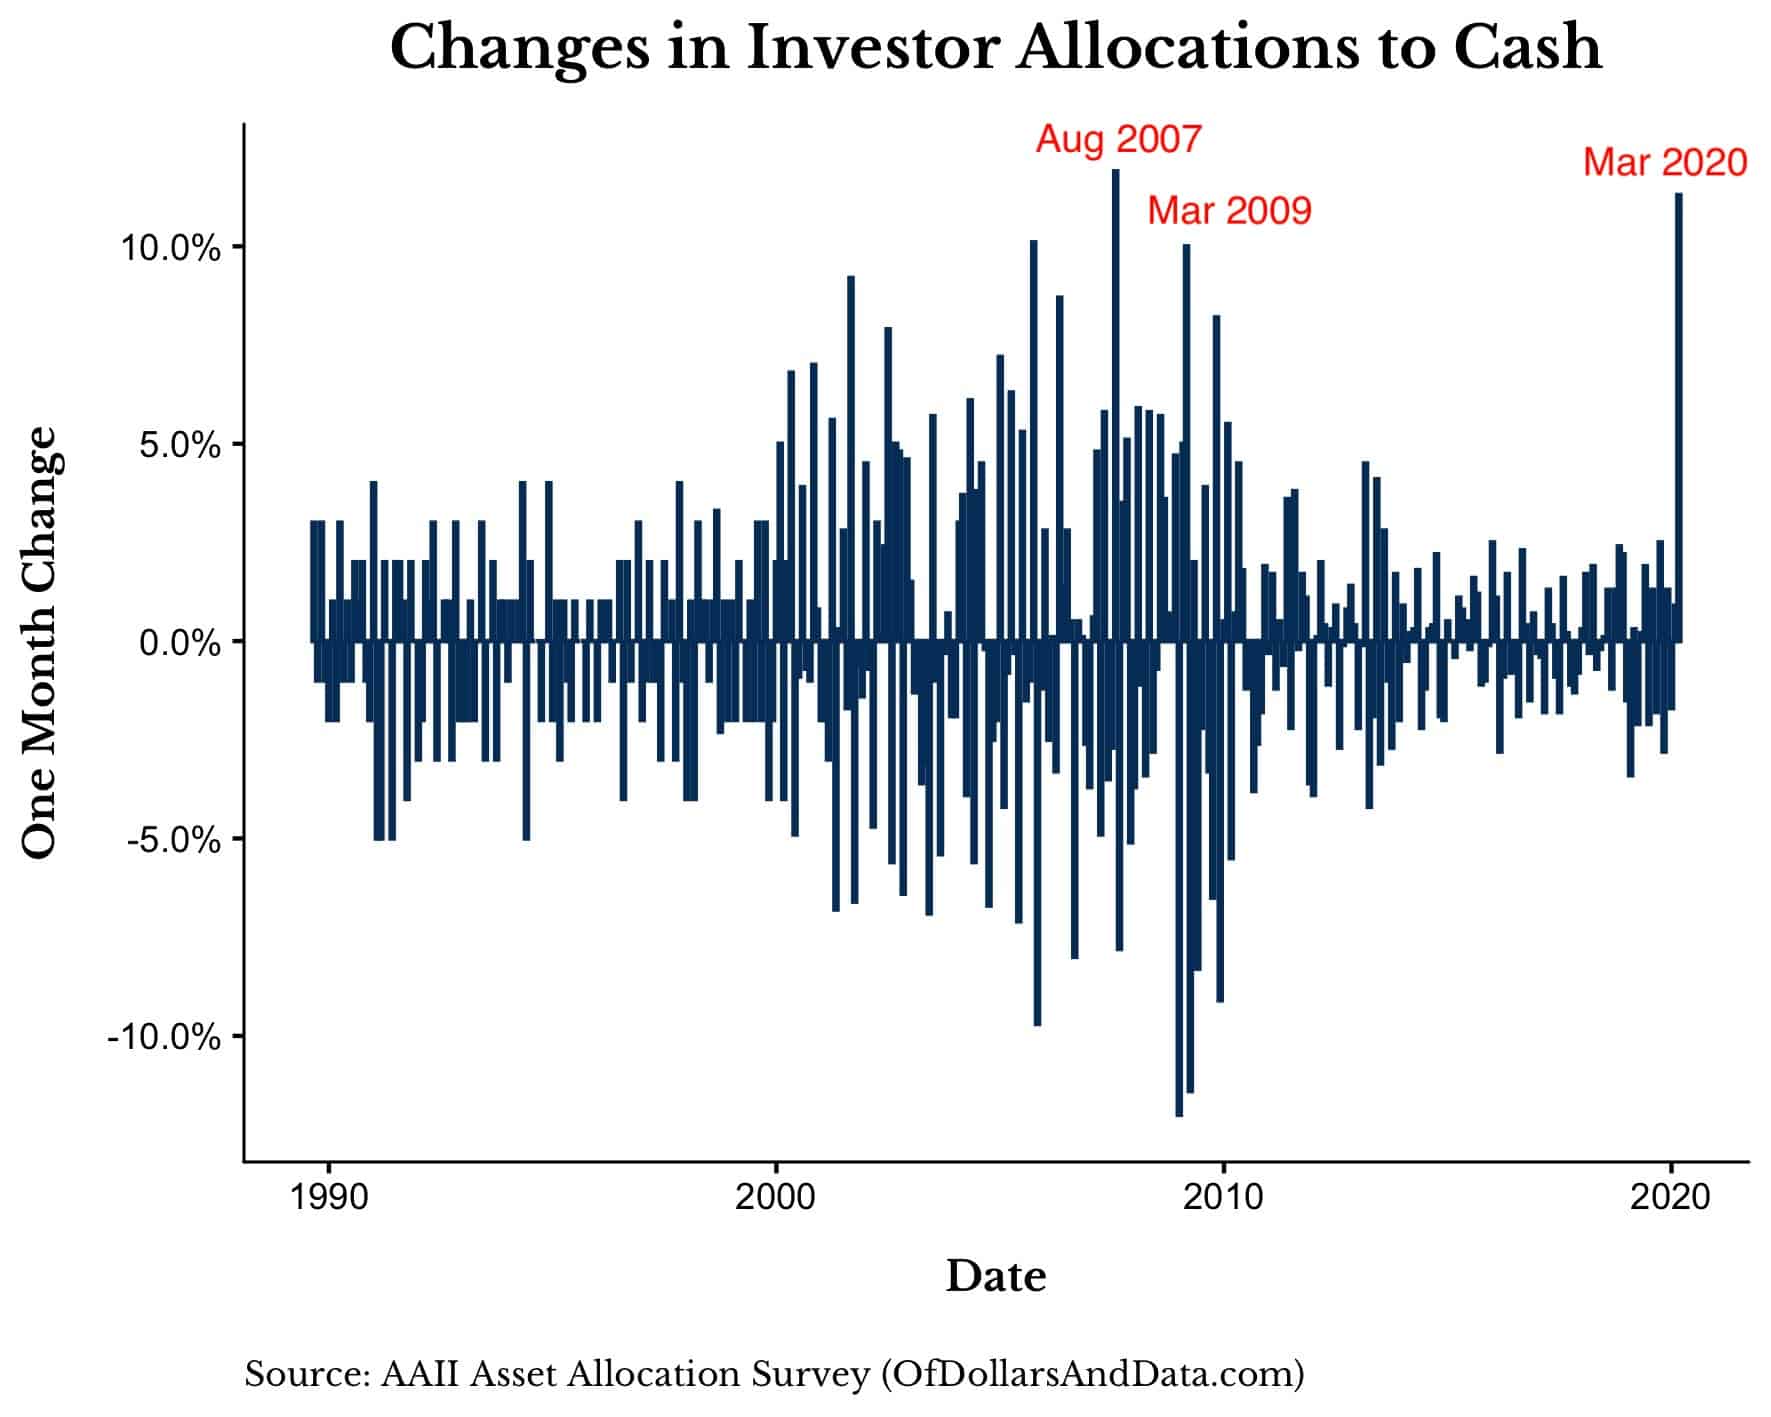 Changes in investor allocation to cash from 1990 to March 2020